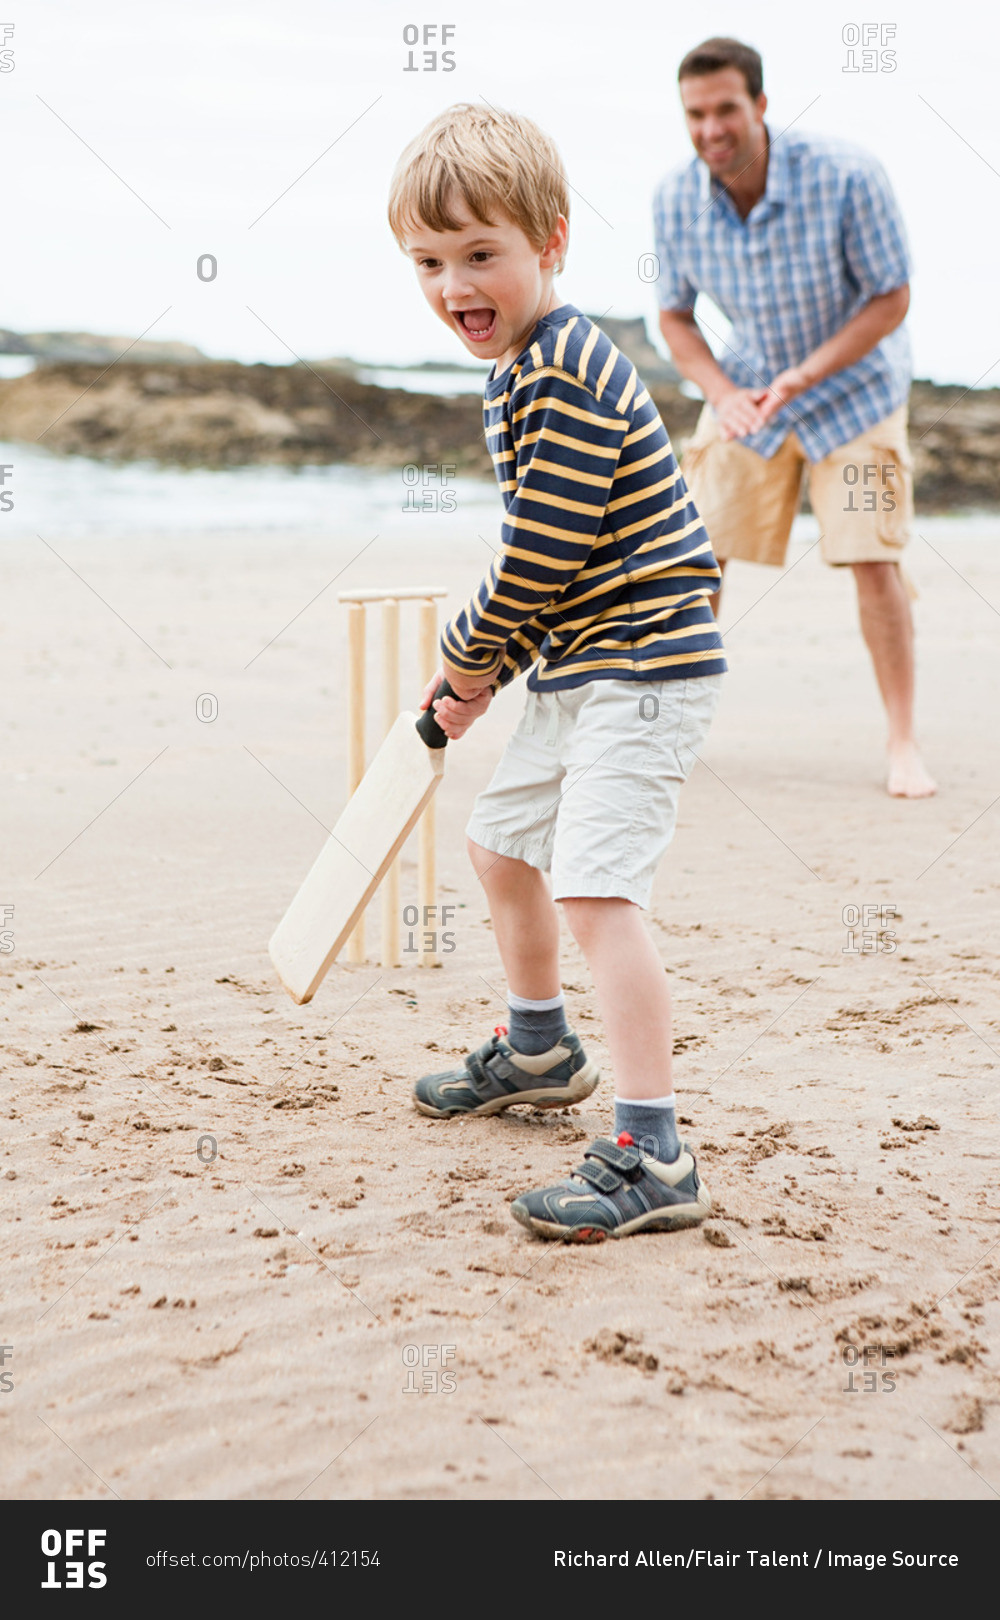 Father and son playing cricket on beach